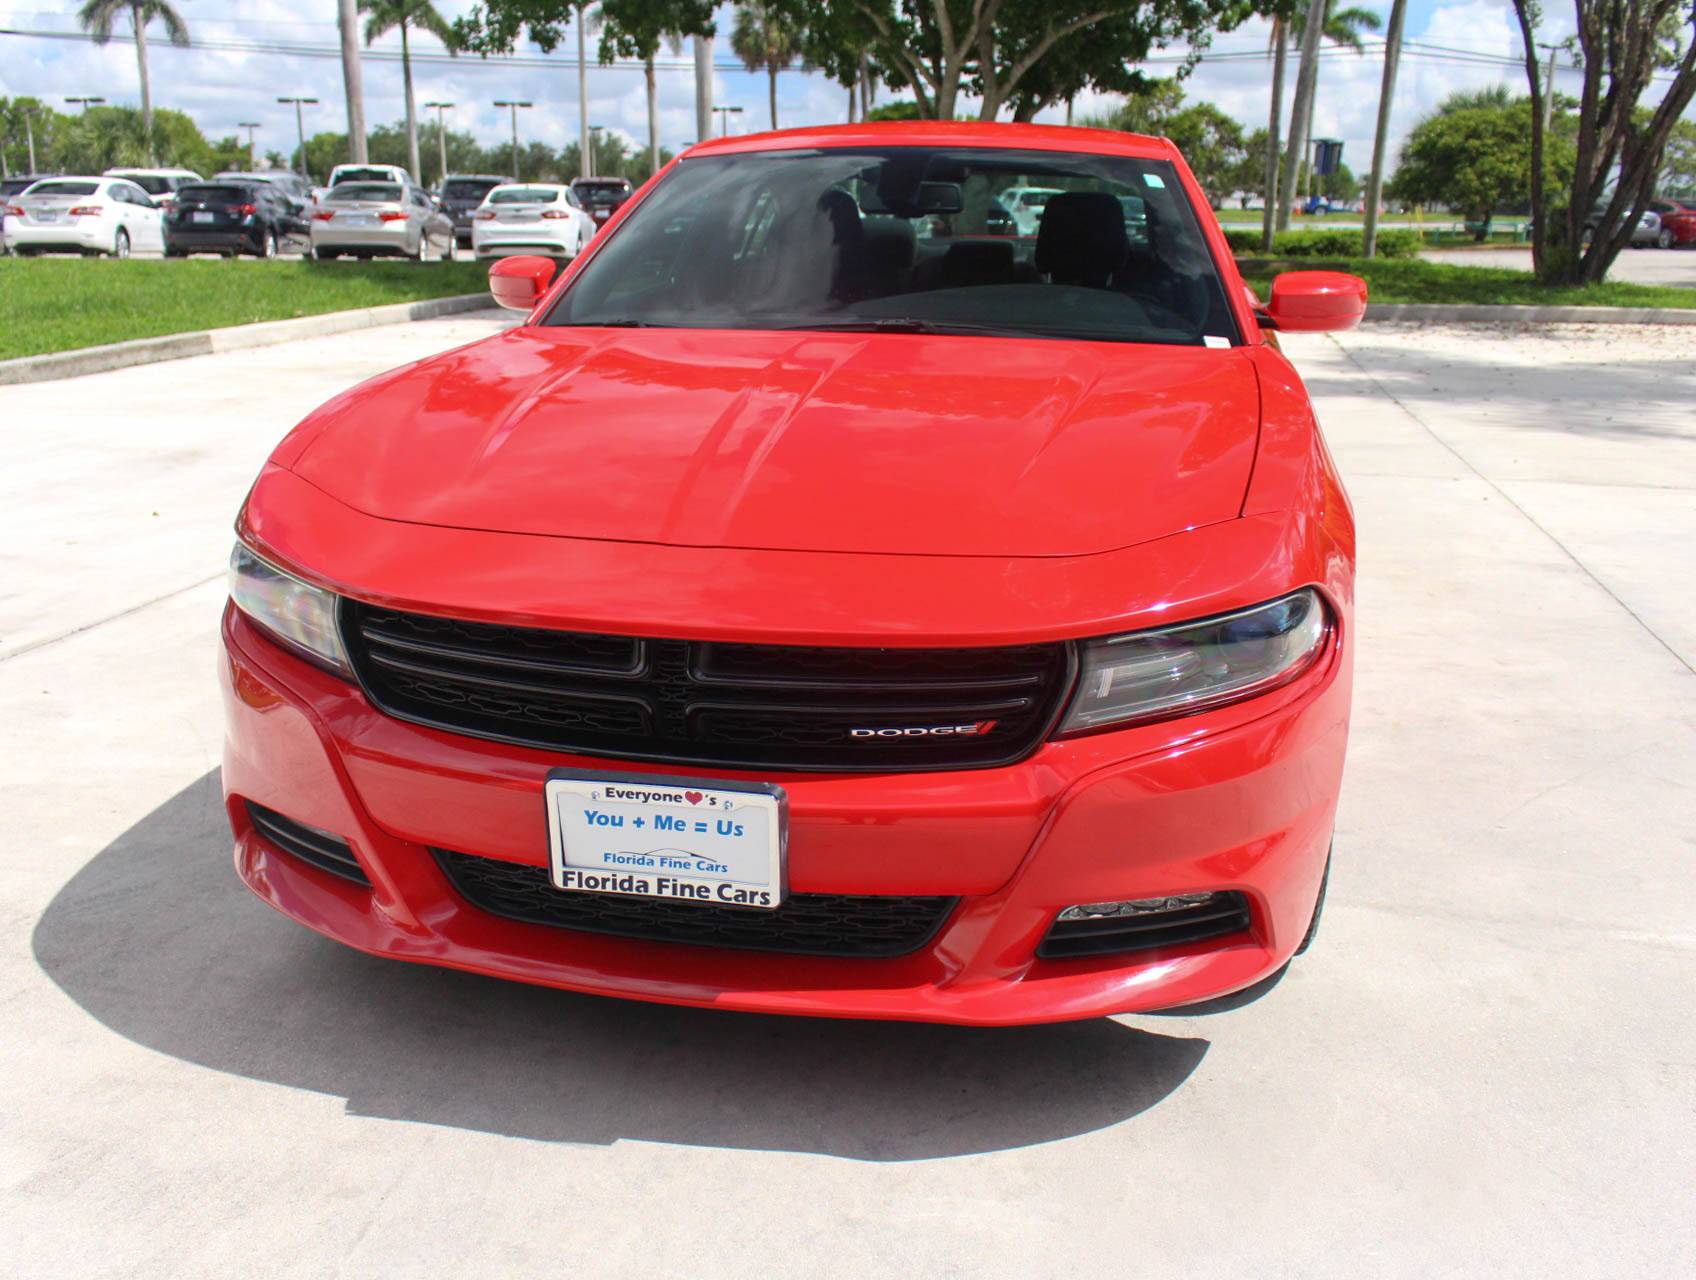 Florida Fine Cars - Used DODGE CHARGER 2018 MIAMI R/t